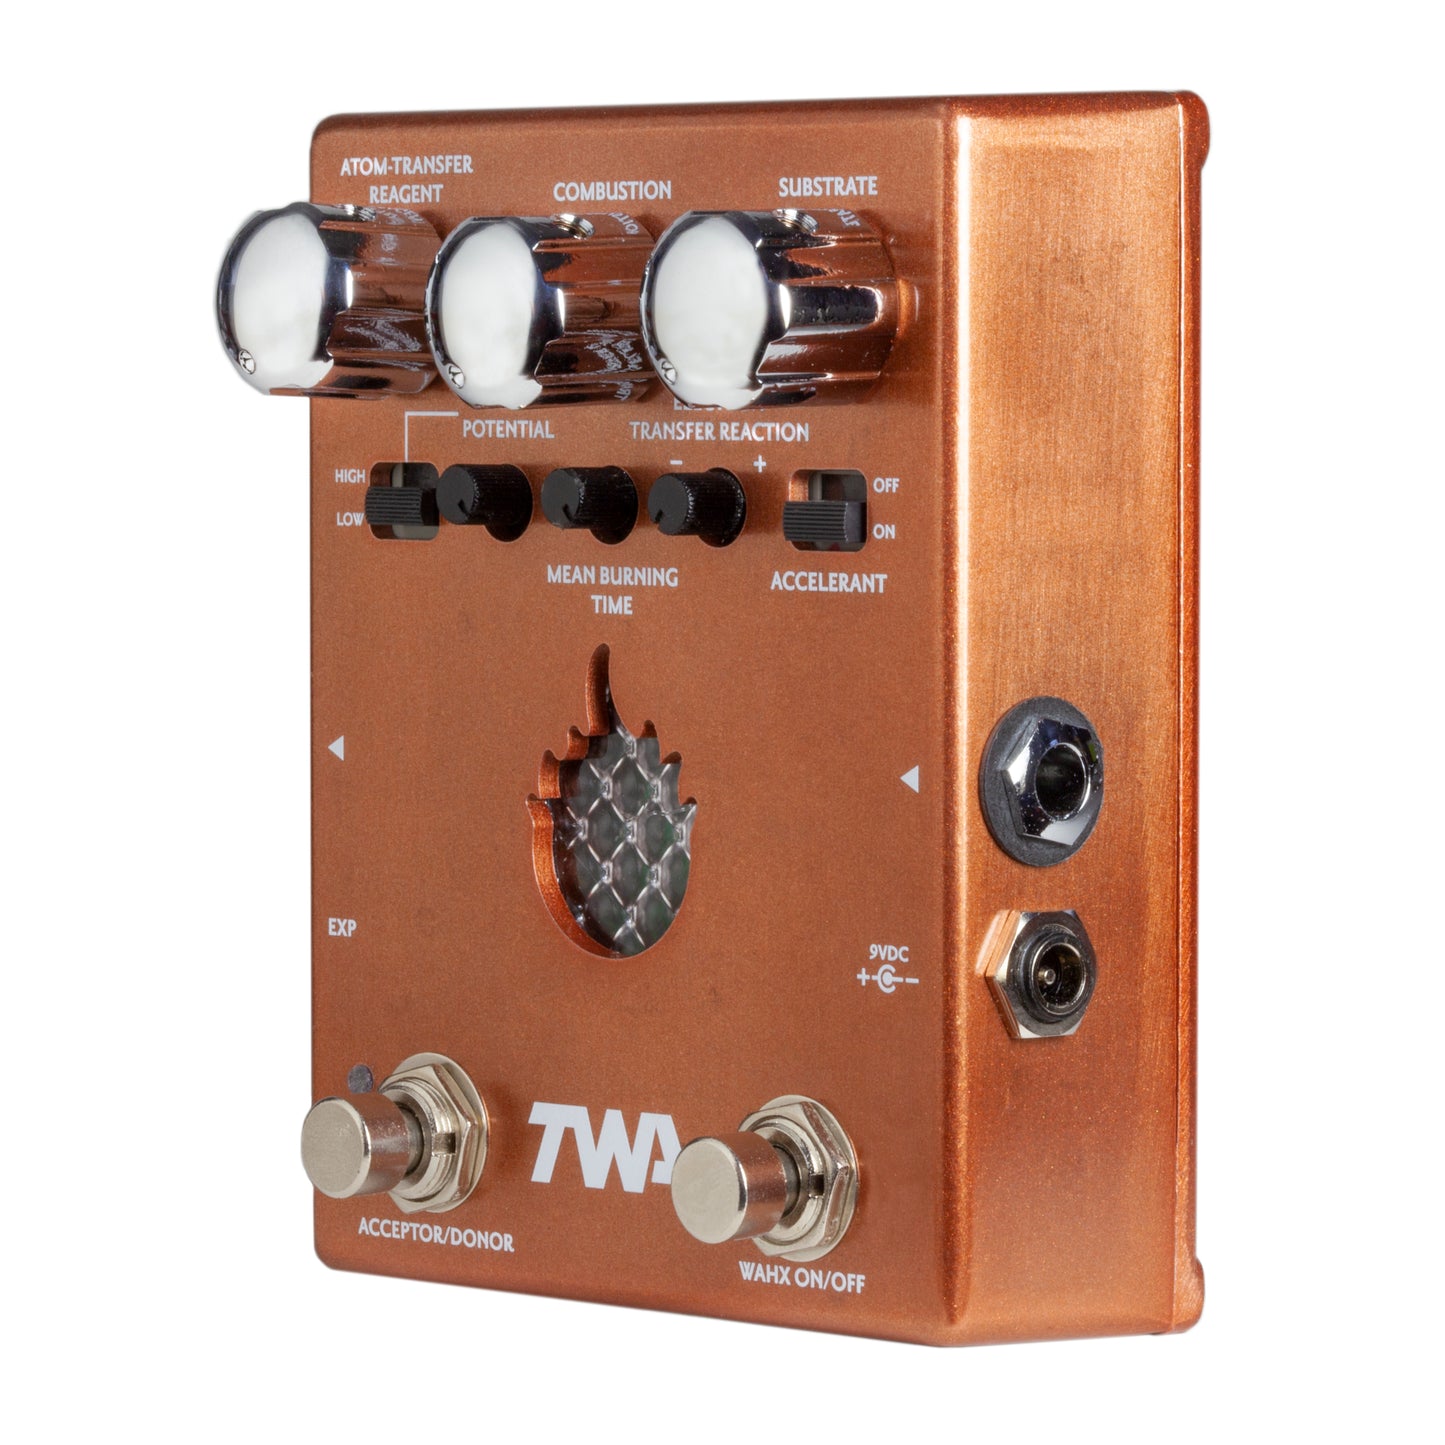 WAHXIDIZER™ - envelope-controlled octave/fuzz/filter/wah